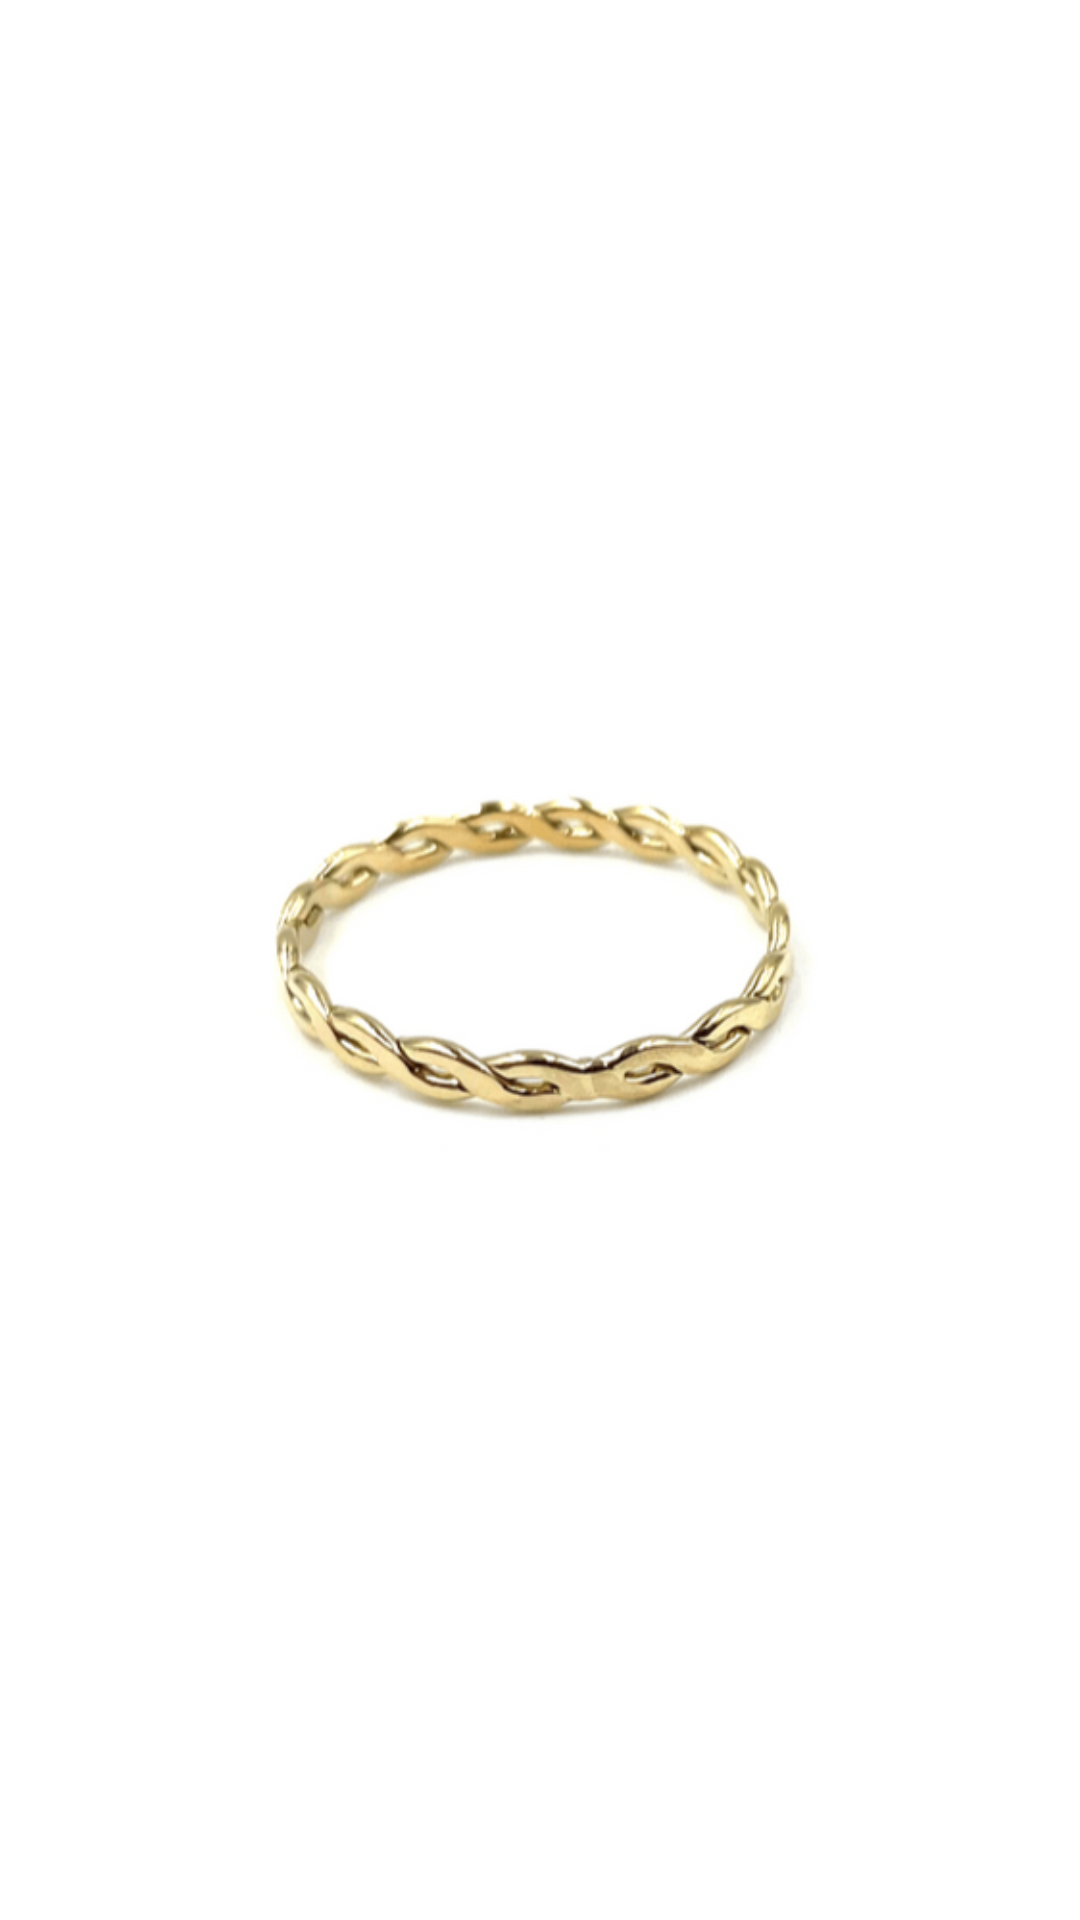 Resort Collection Gold Woven Ring - Waterproof!